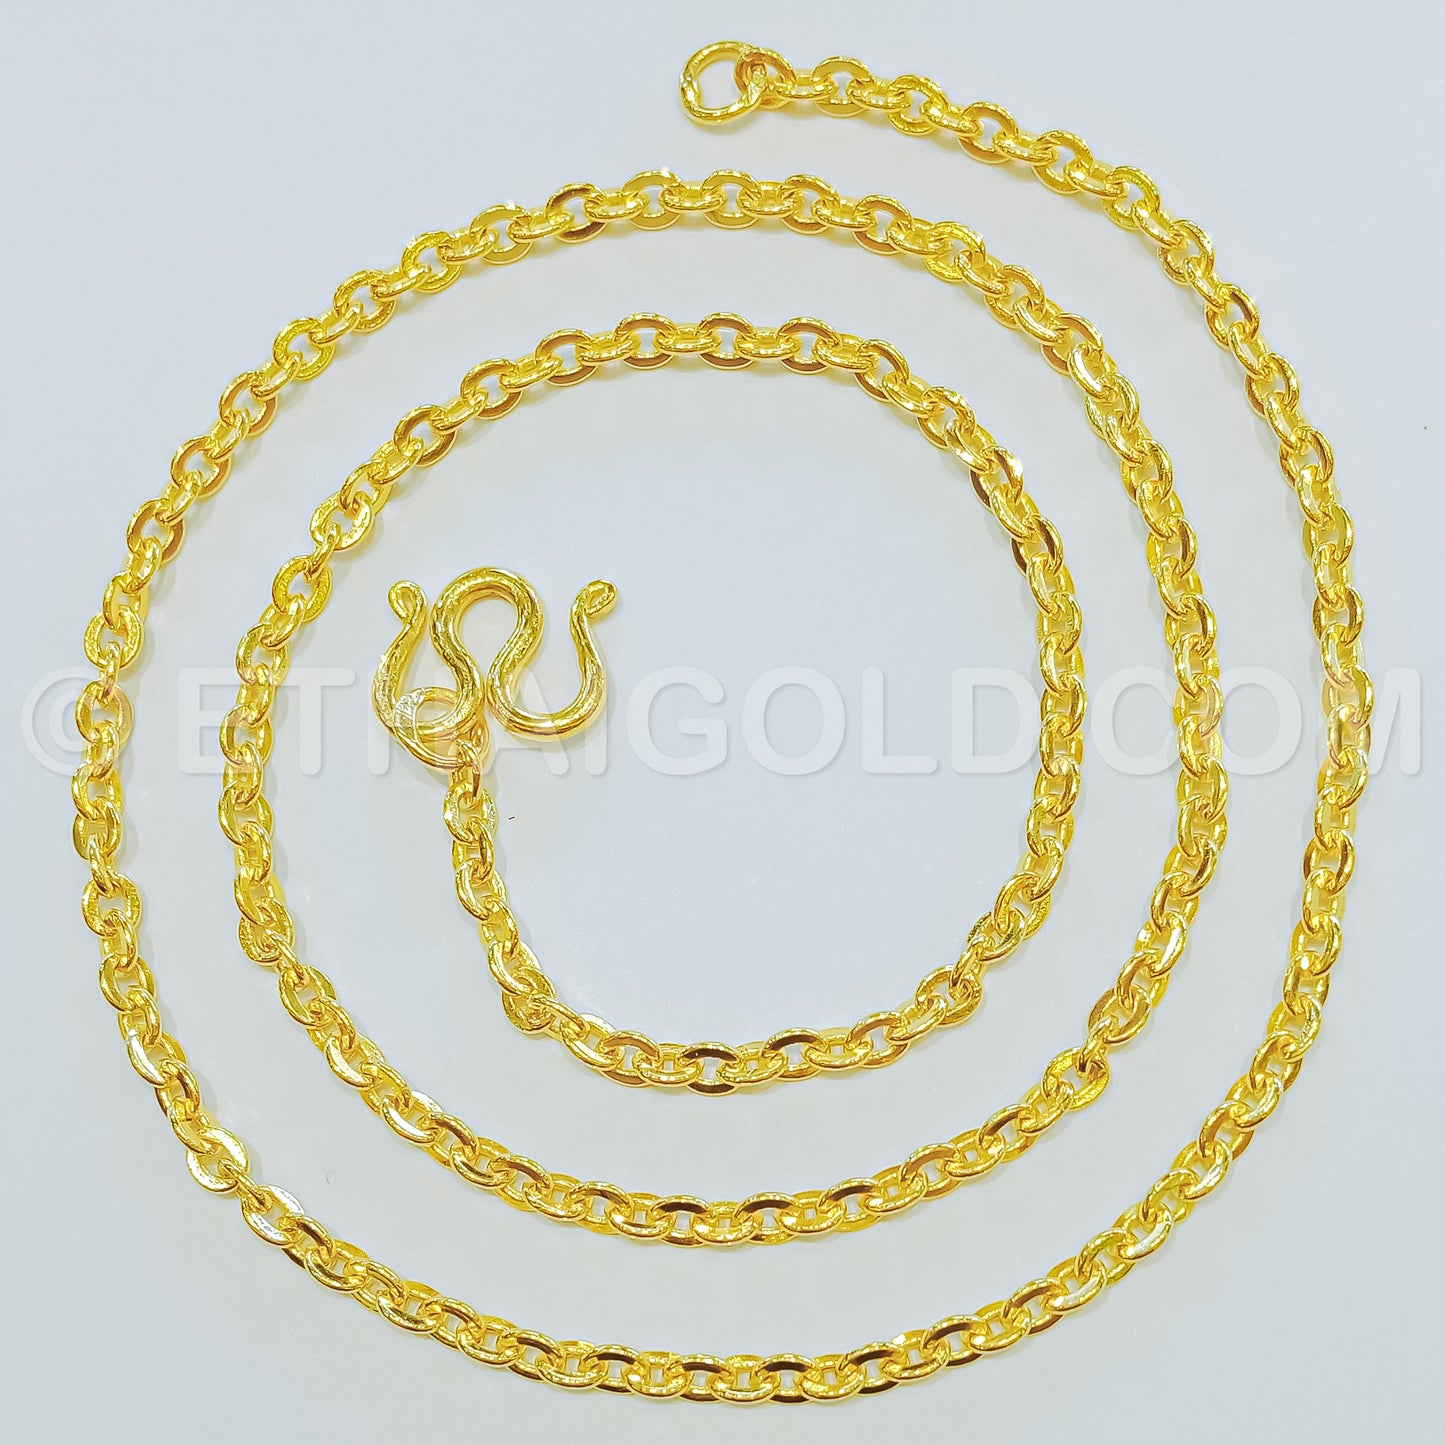 4 BAHT POLISHED SOLID FLAT CABLE CHAIN NECKLACE IN 23K GOLD (ID: N0204B)